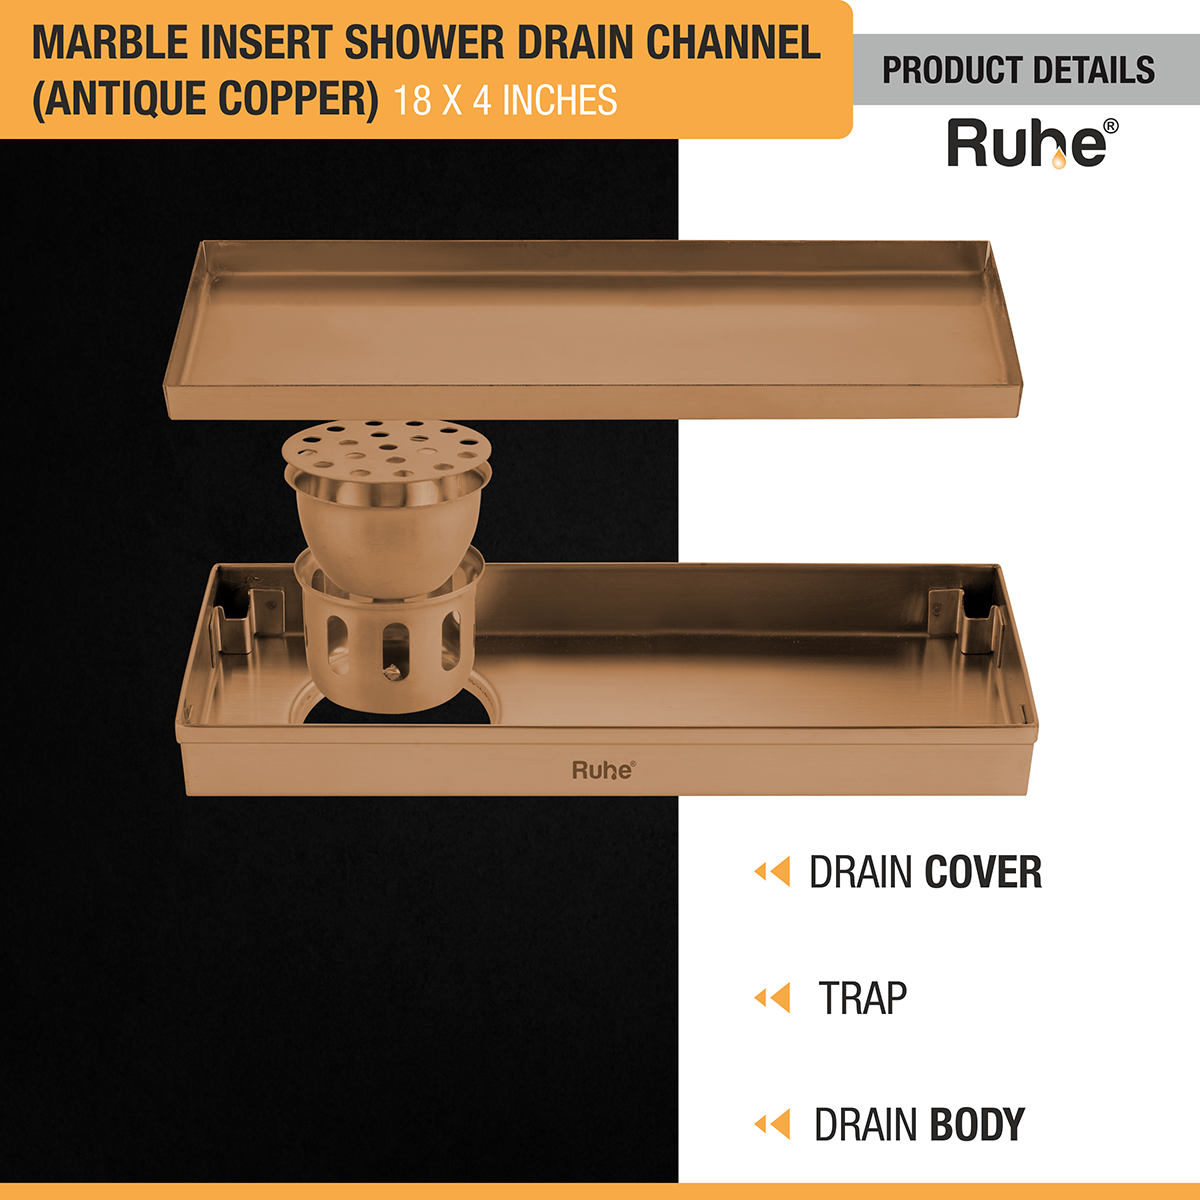 Marble Insert Shower Drain Channel (18 x 4 Inches) ROSE GOLD PVD Coated with drain cover, trap, and drain body